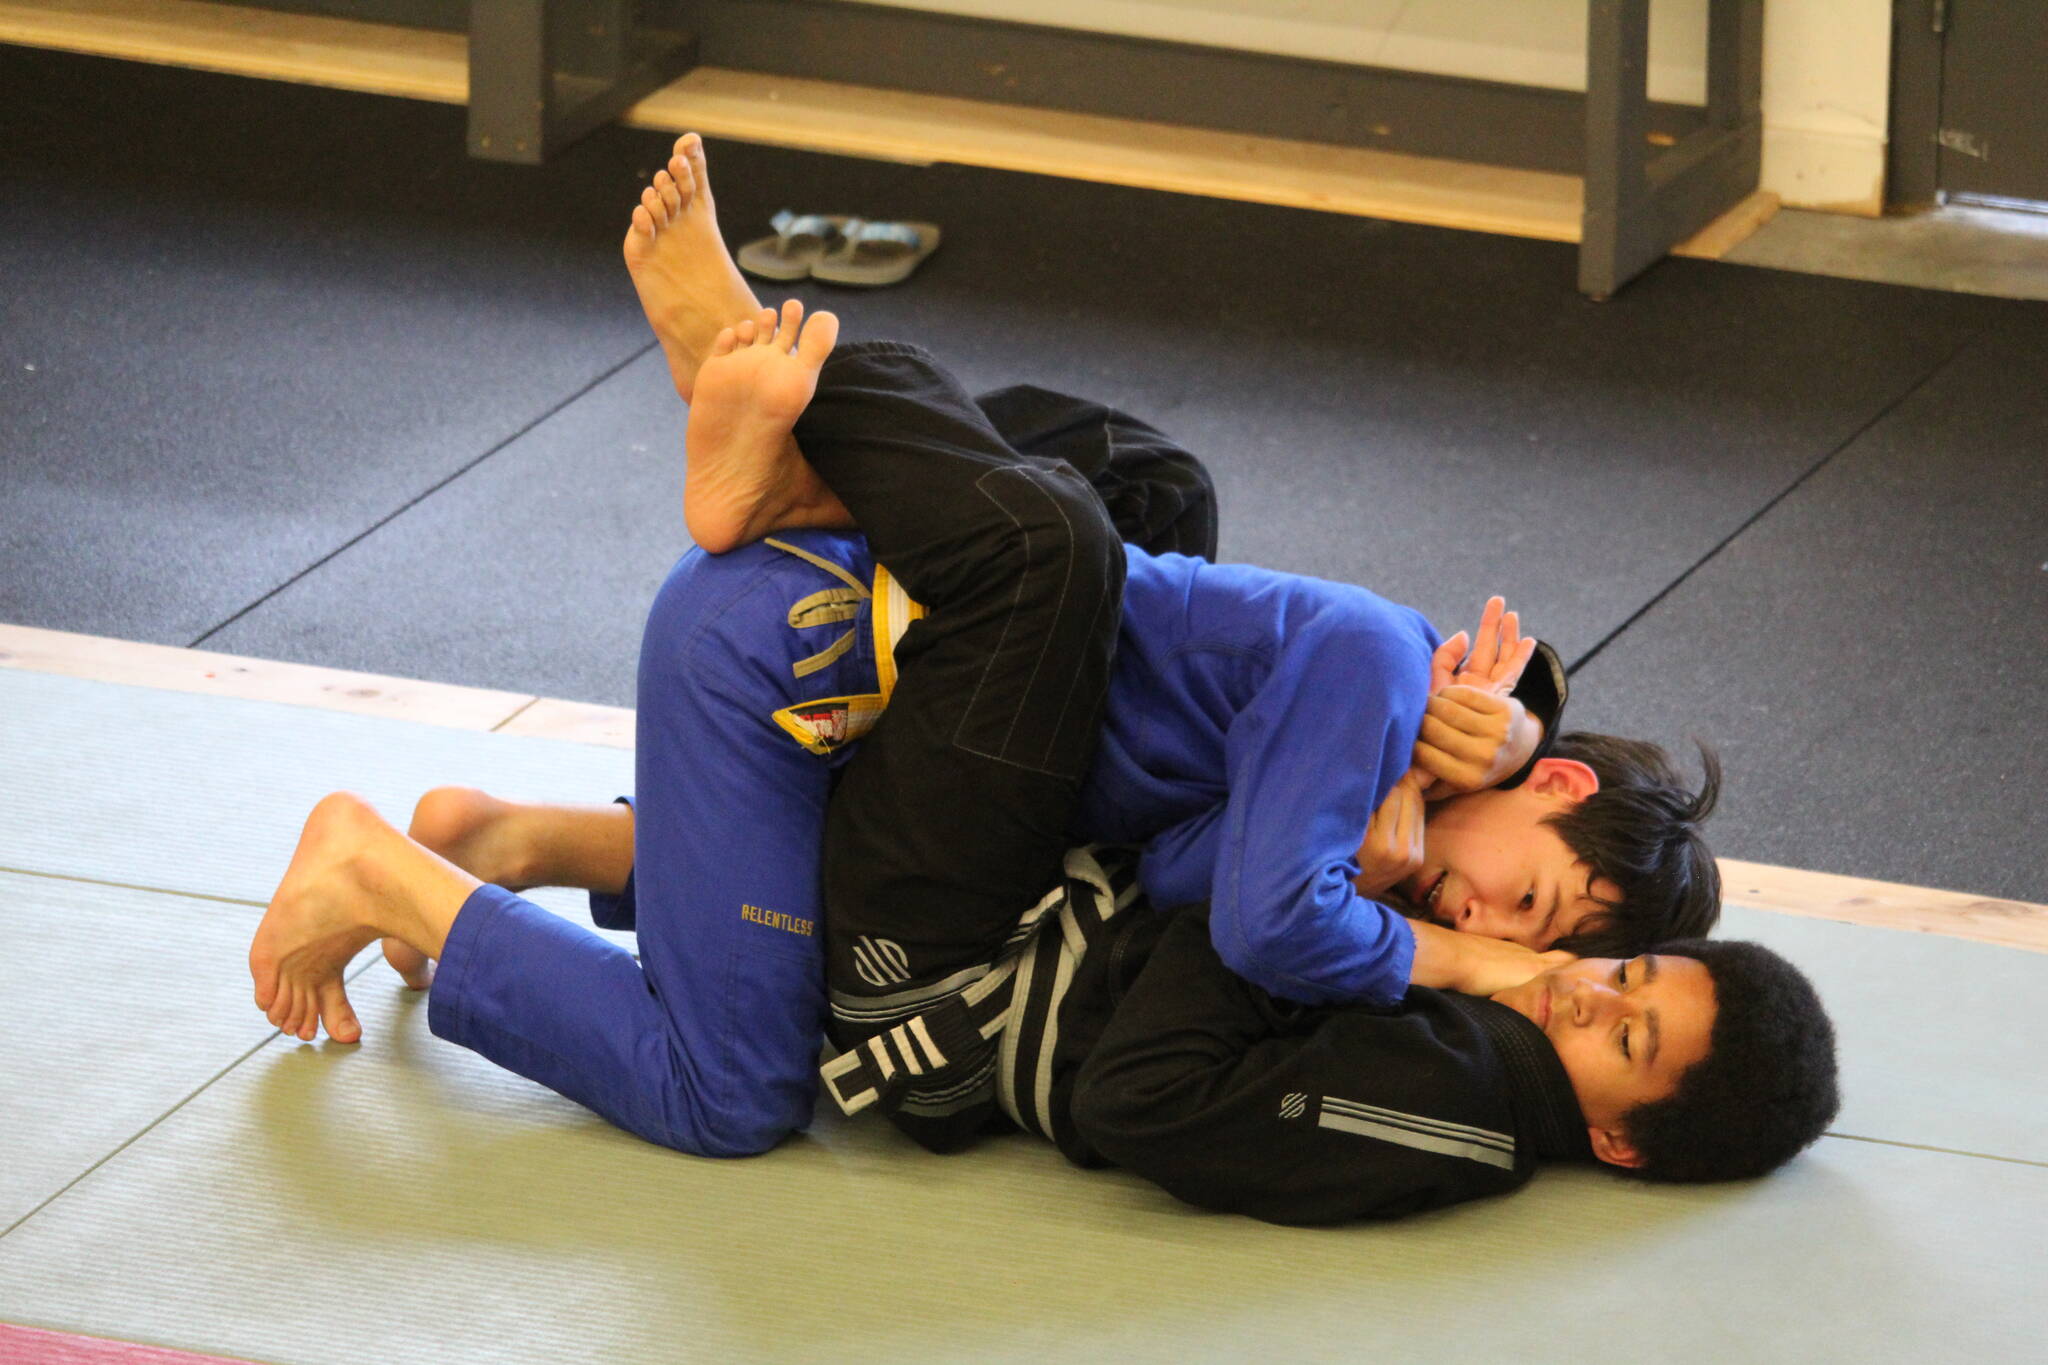 Photo by Karina Andrew/Whidbey News-Times
Austen Deater, left, practices with Devon Robinson in the teens’ Jiu Jitsu class.